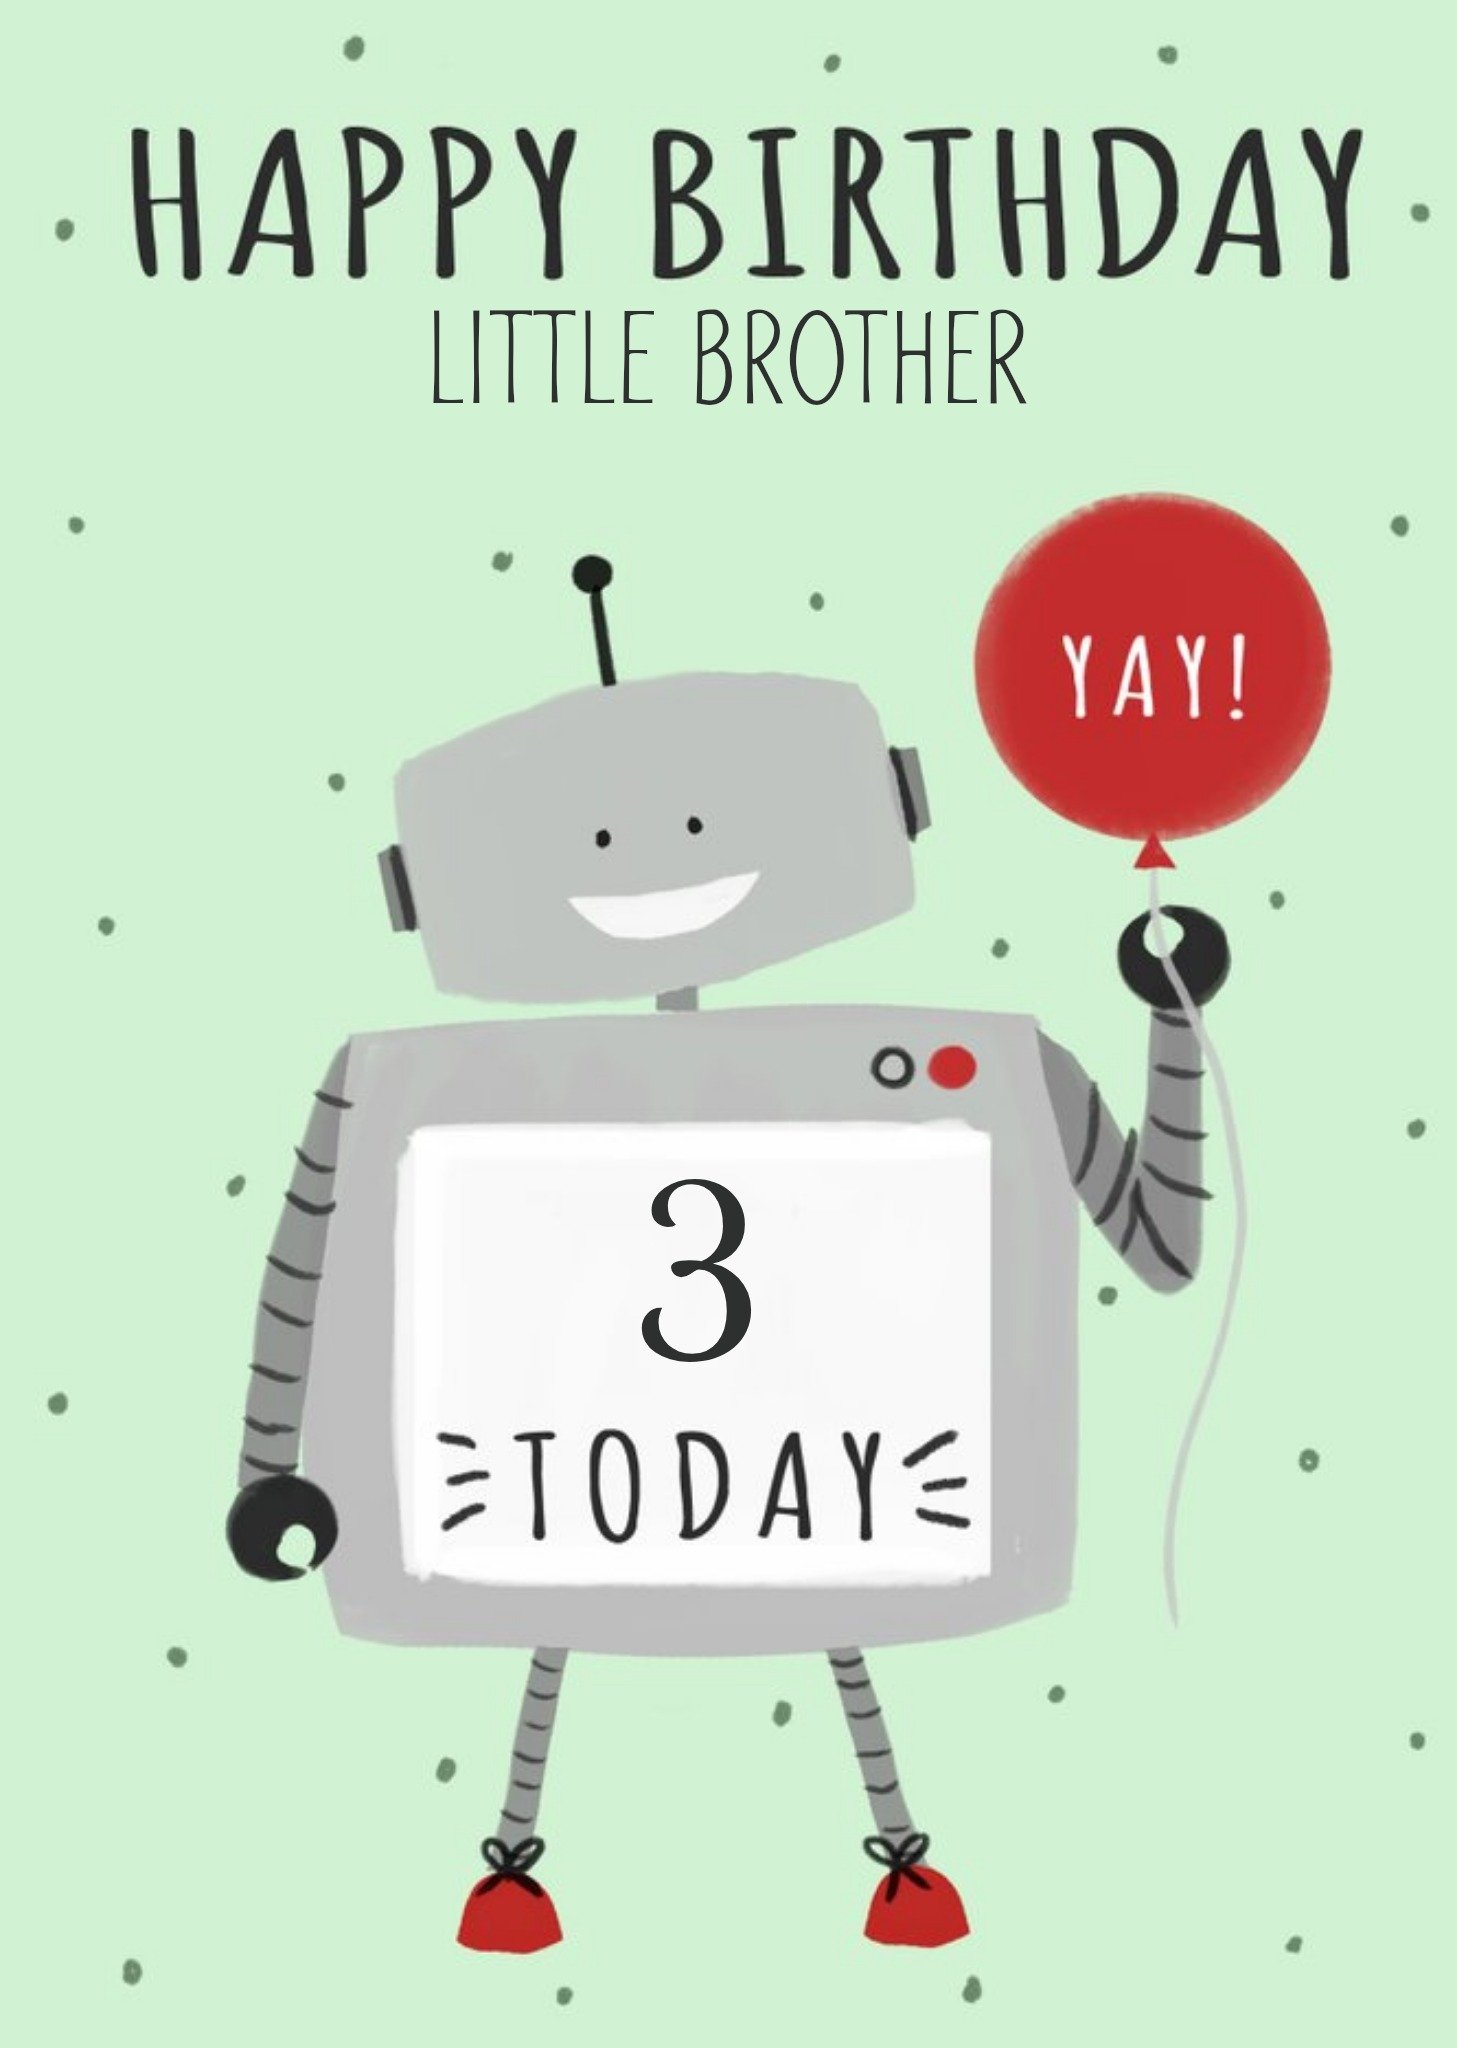 Making Meadows Okey Dokey Illustrated Robot Little Brother Birthday Card, Large